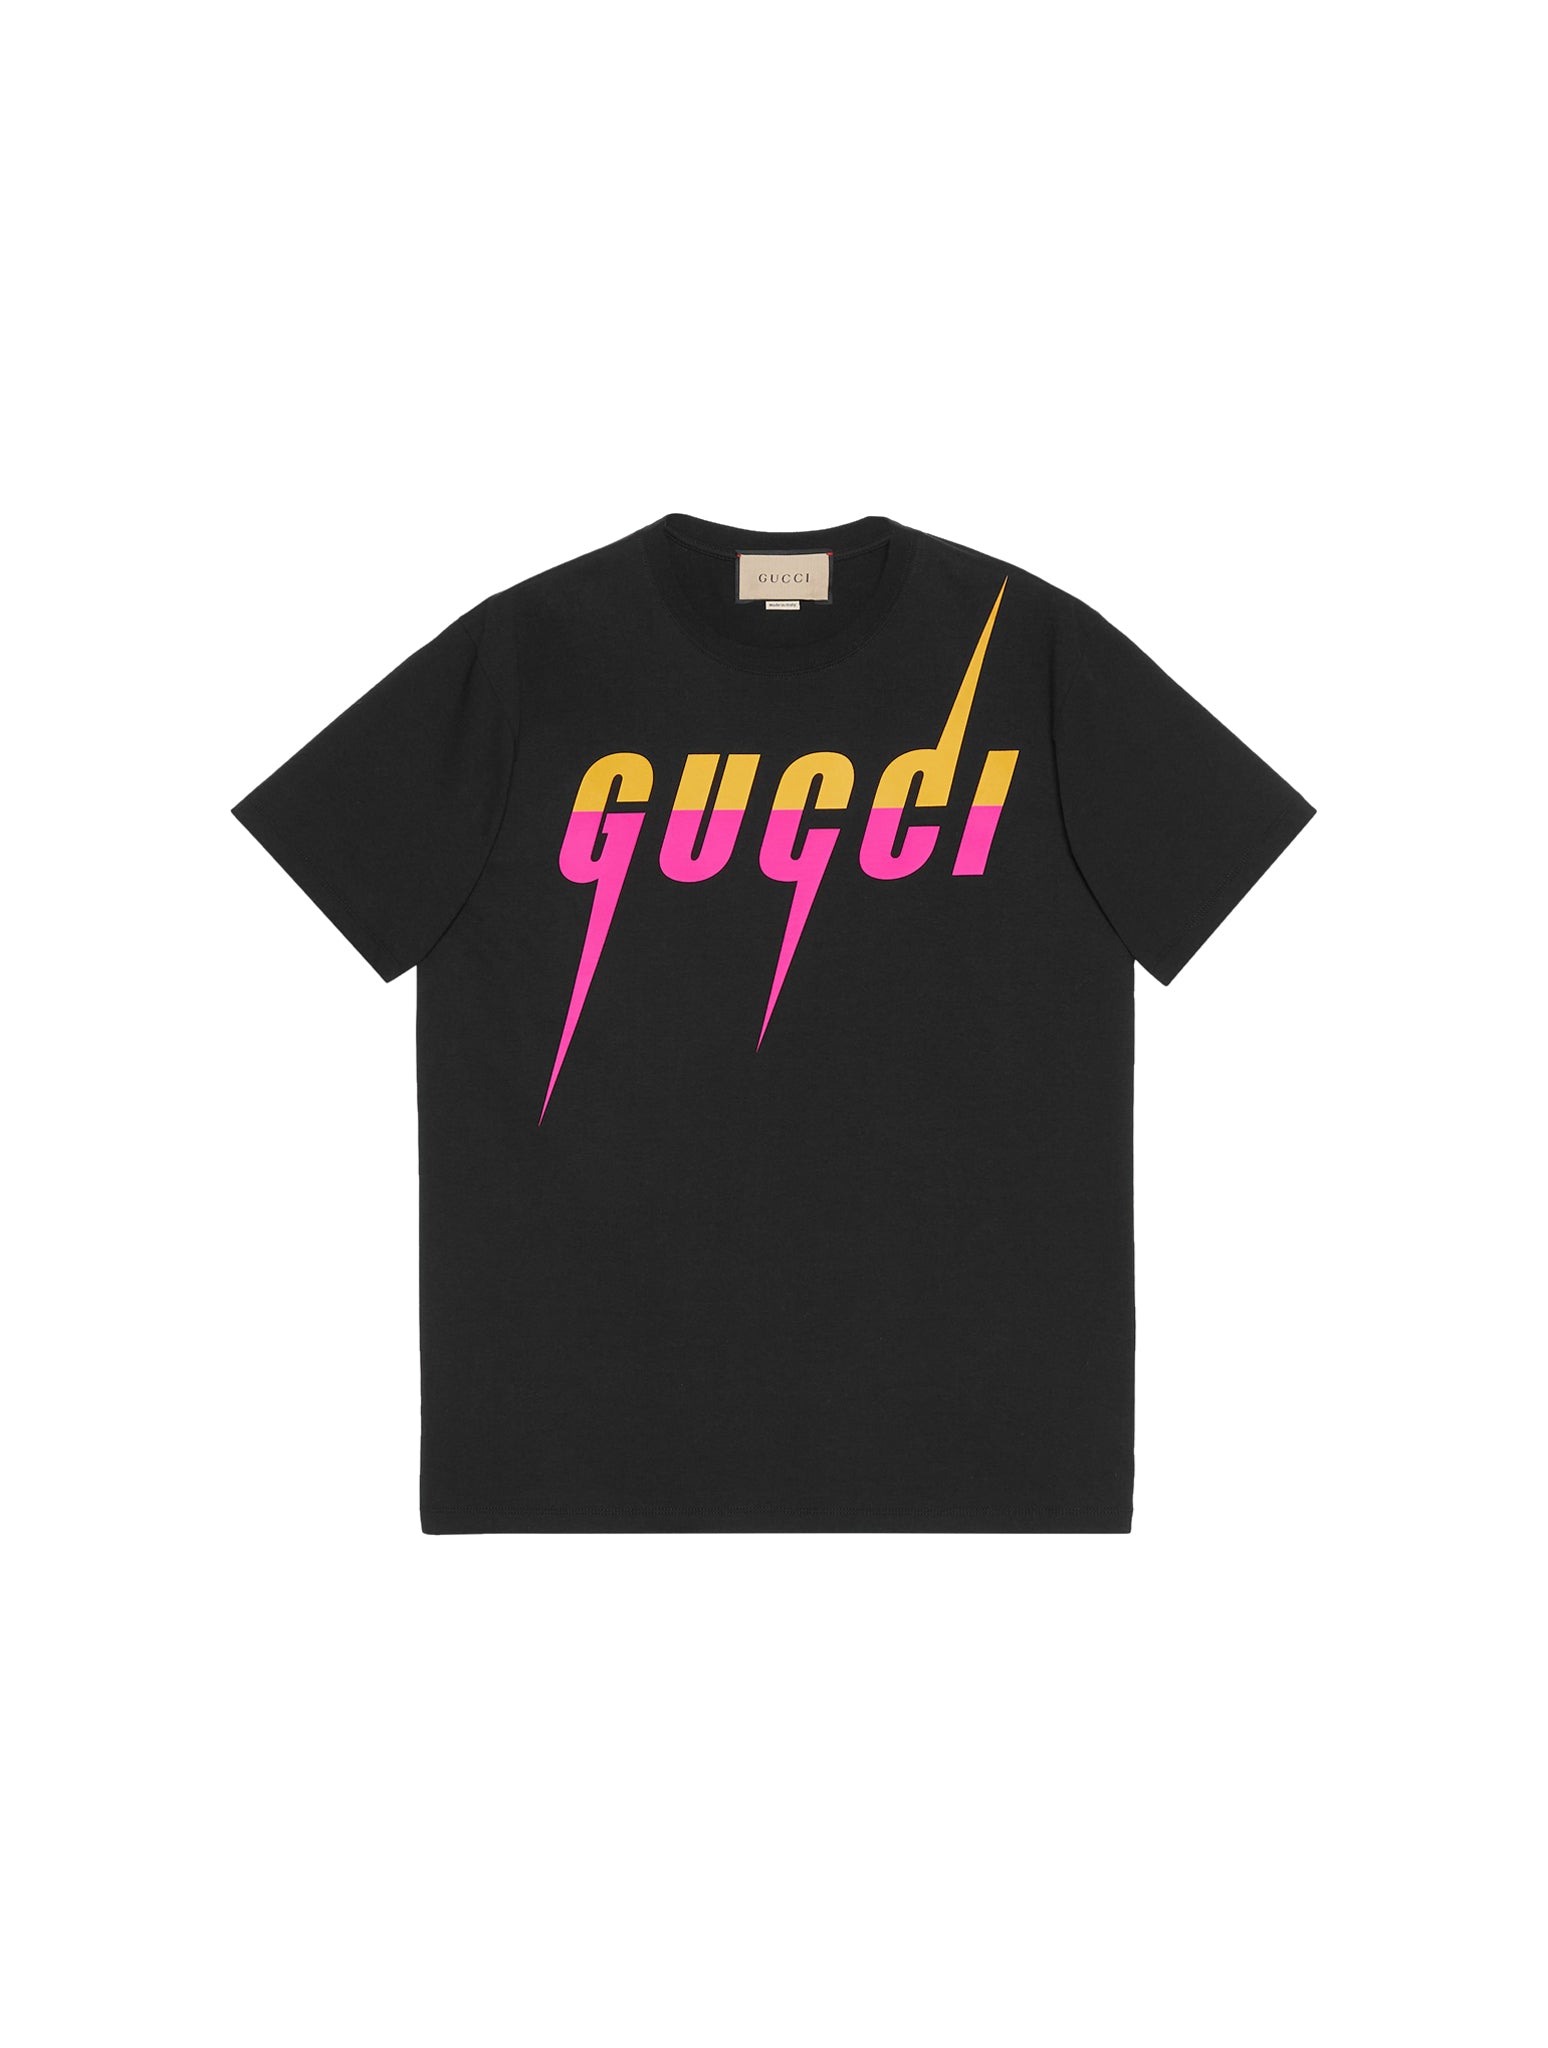 COTTON T-SHIRT WITH GUCCI BLADE PRINT